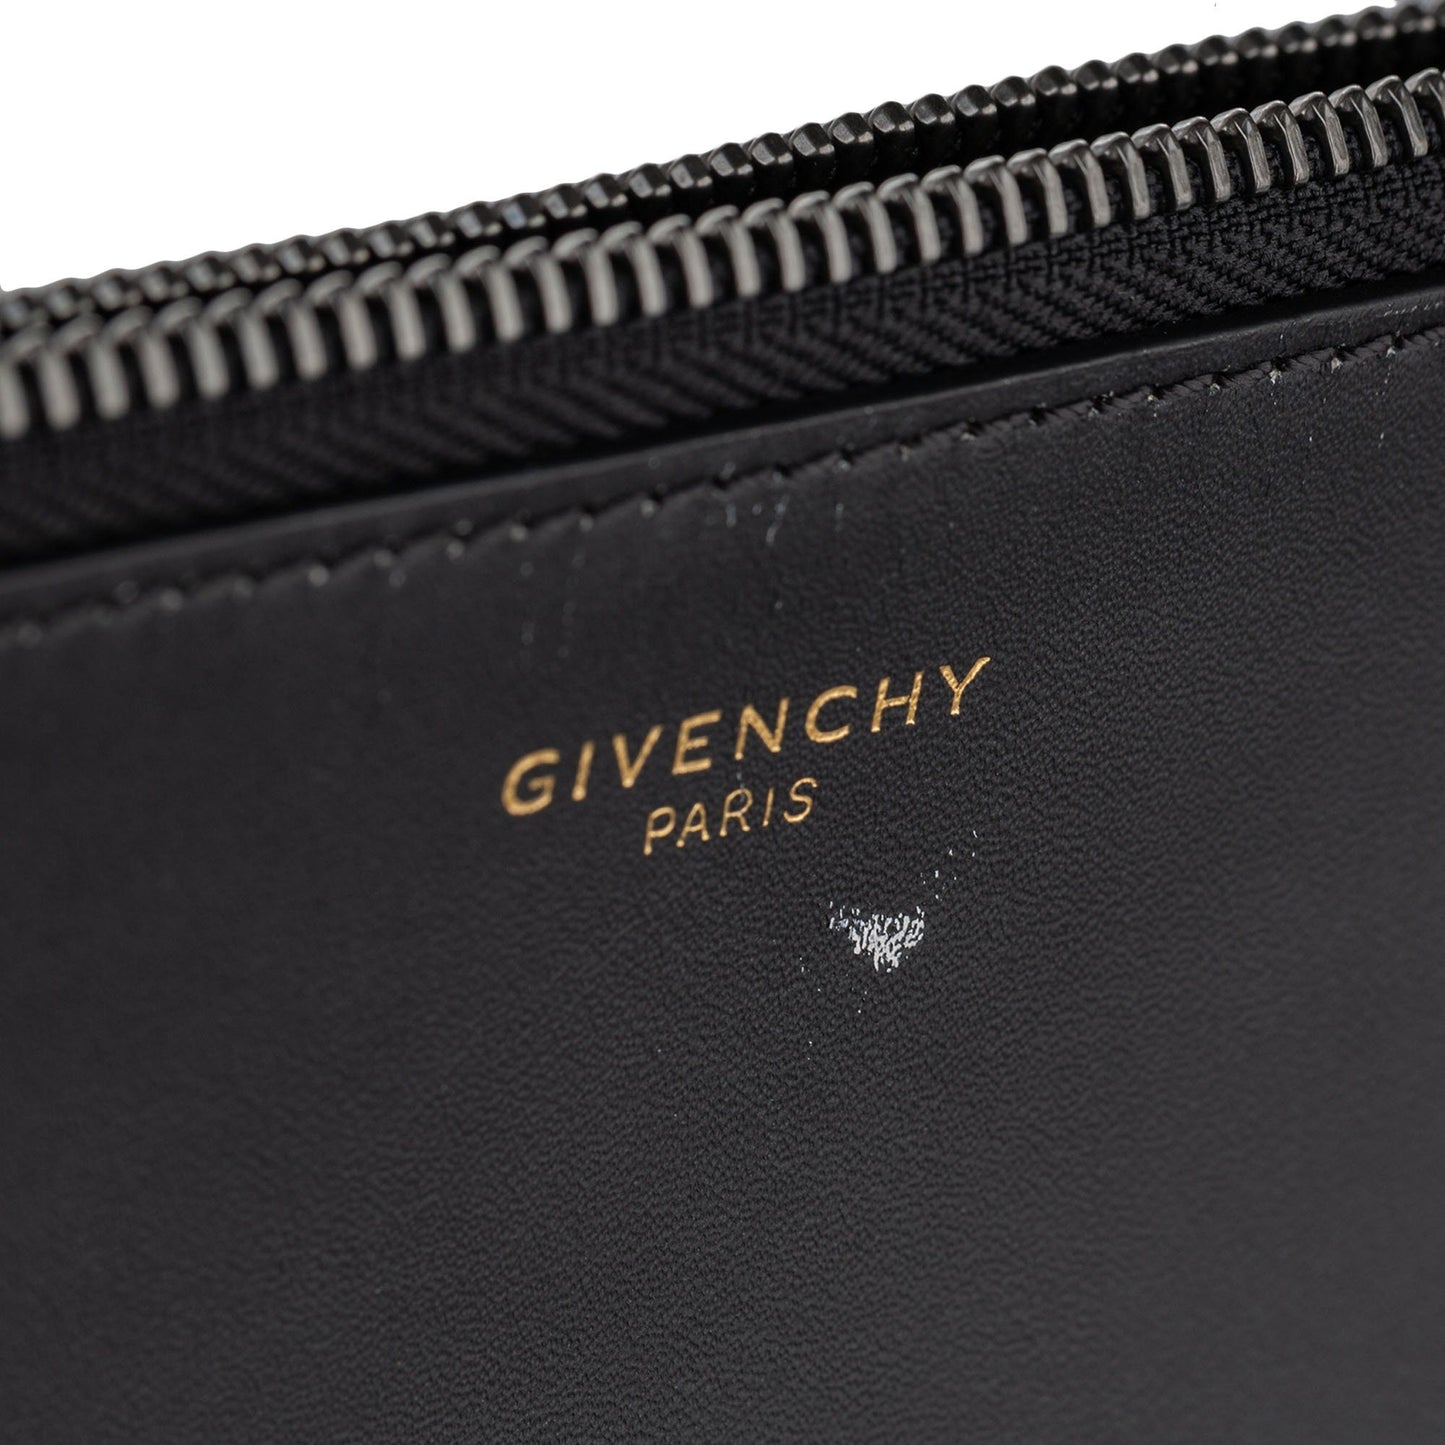 Givenchy Winged Tiger Print Black Leather Clutch Bags Givenchy 